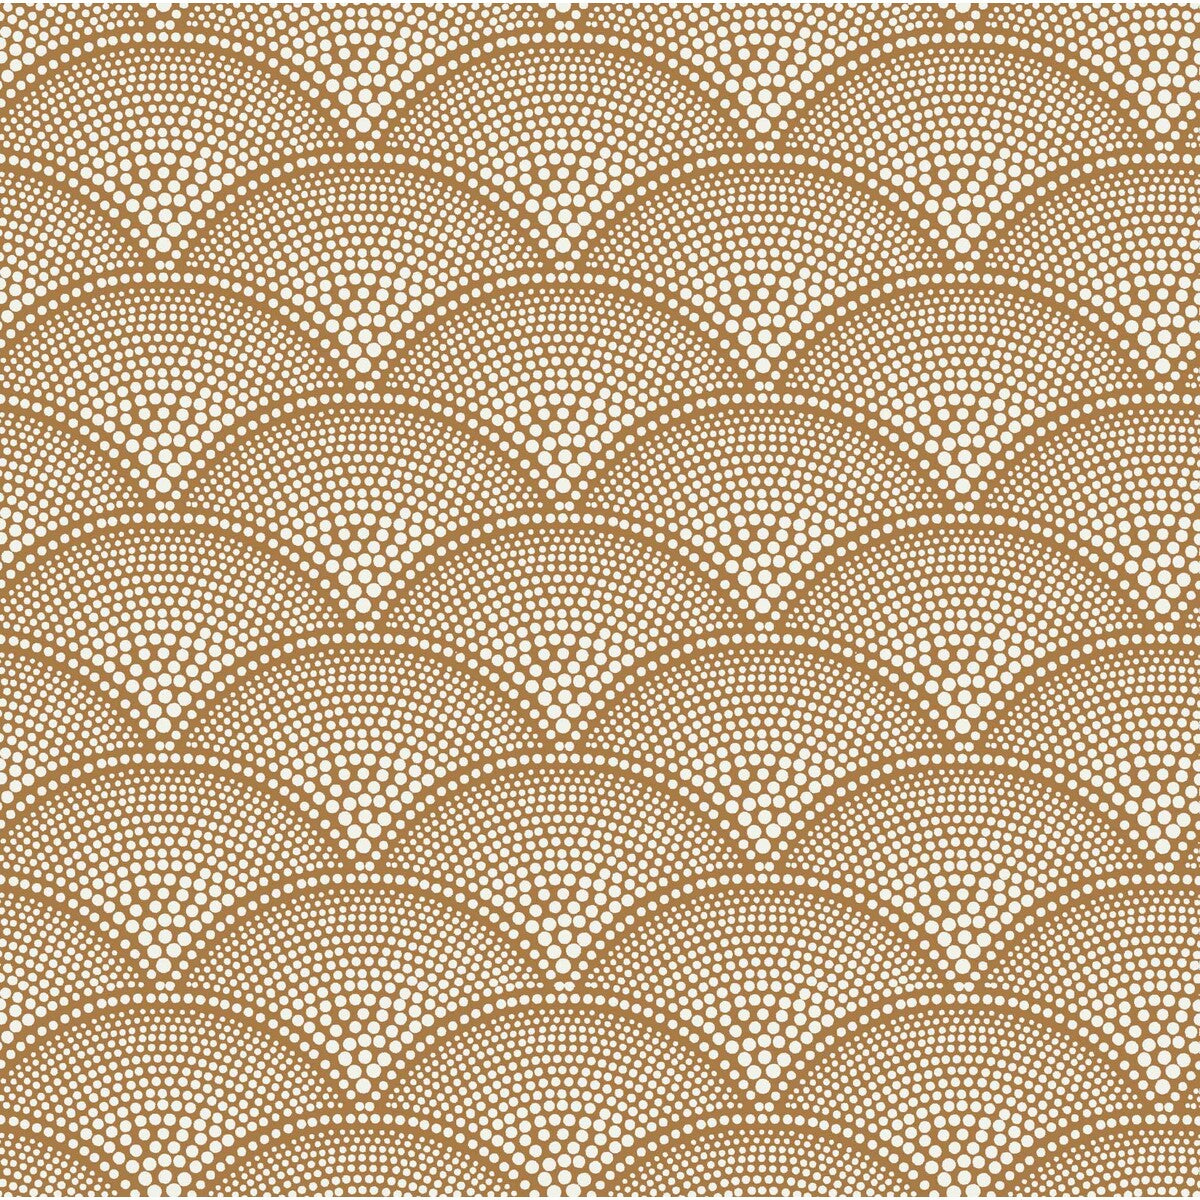 Feather Fan fabric in crm gingr color - pattern F111/8032.CS.0 - by Cole &amp; Son in the Cole &amp; Son Contemporary Fabrics collection